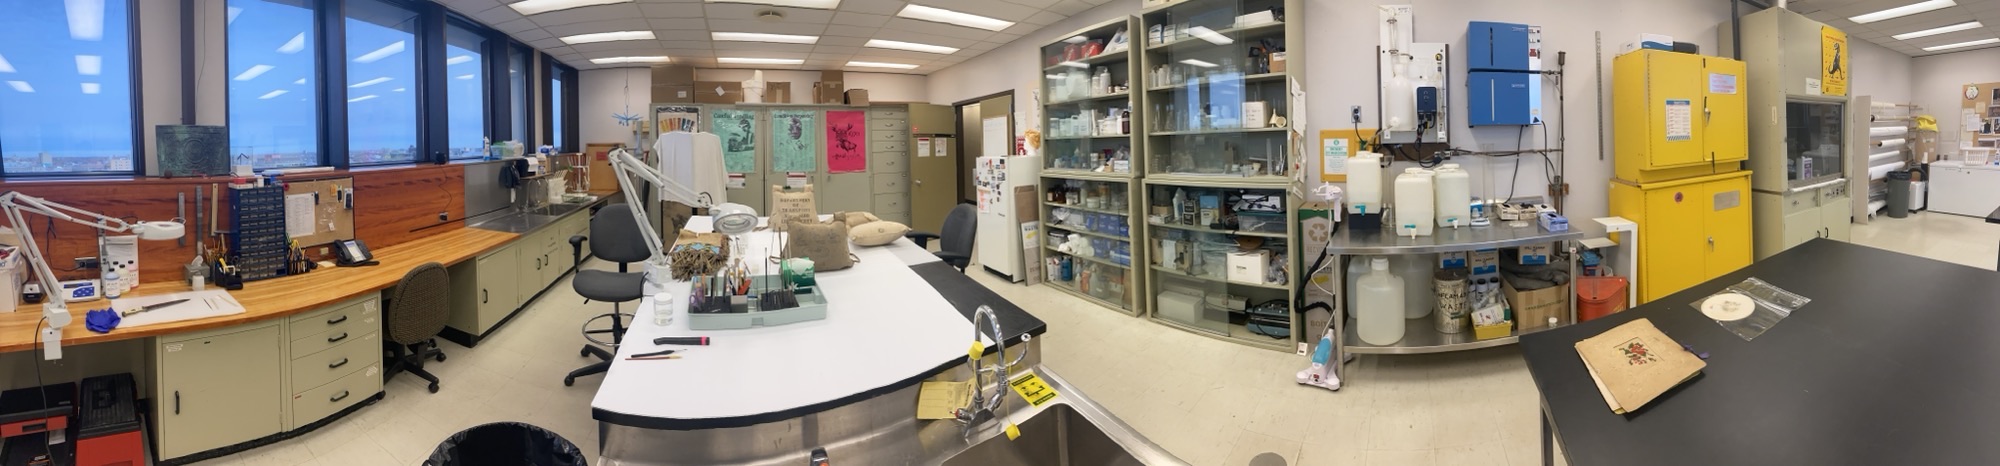 Panoramic photograph of the conservation lab with work stations and storage shelves.